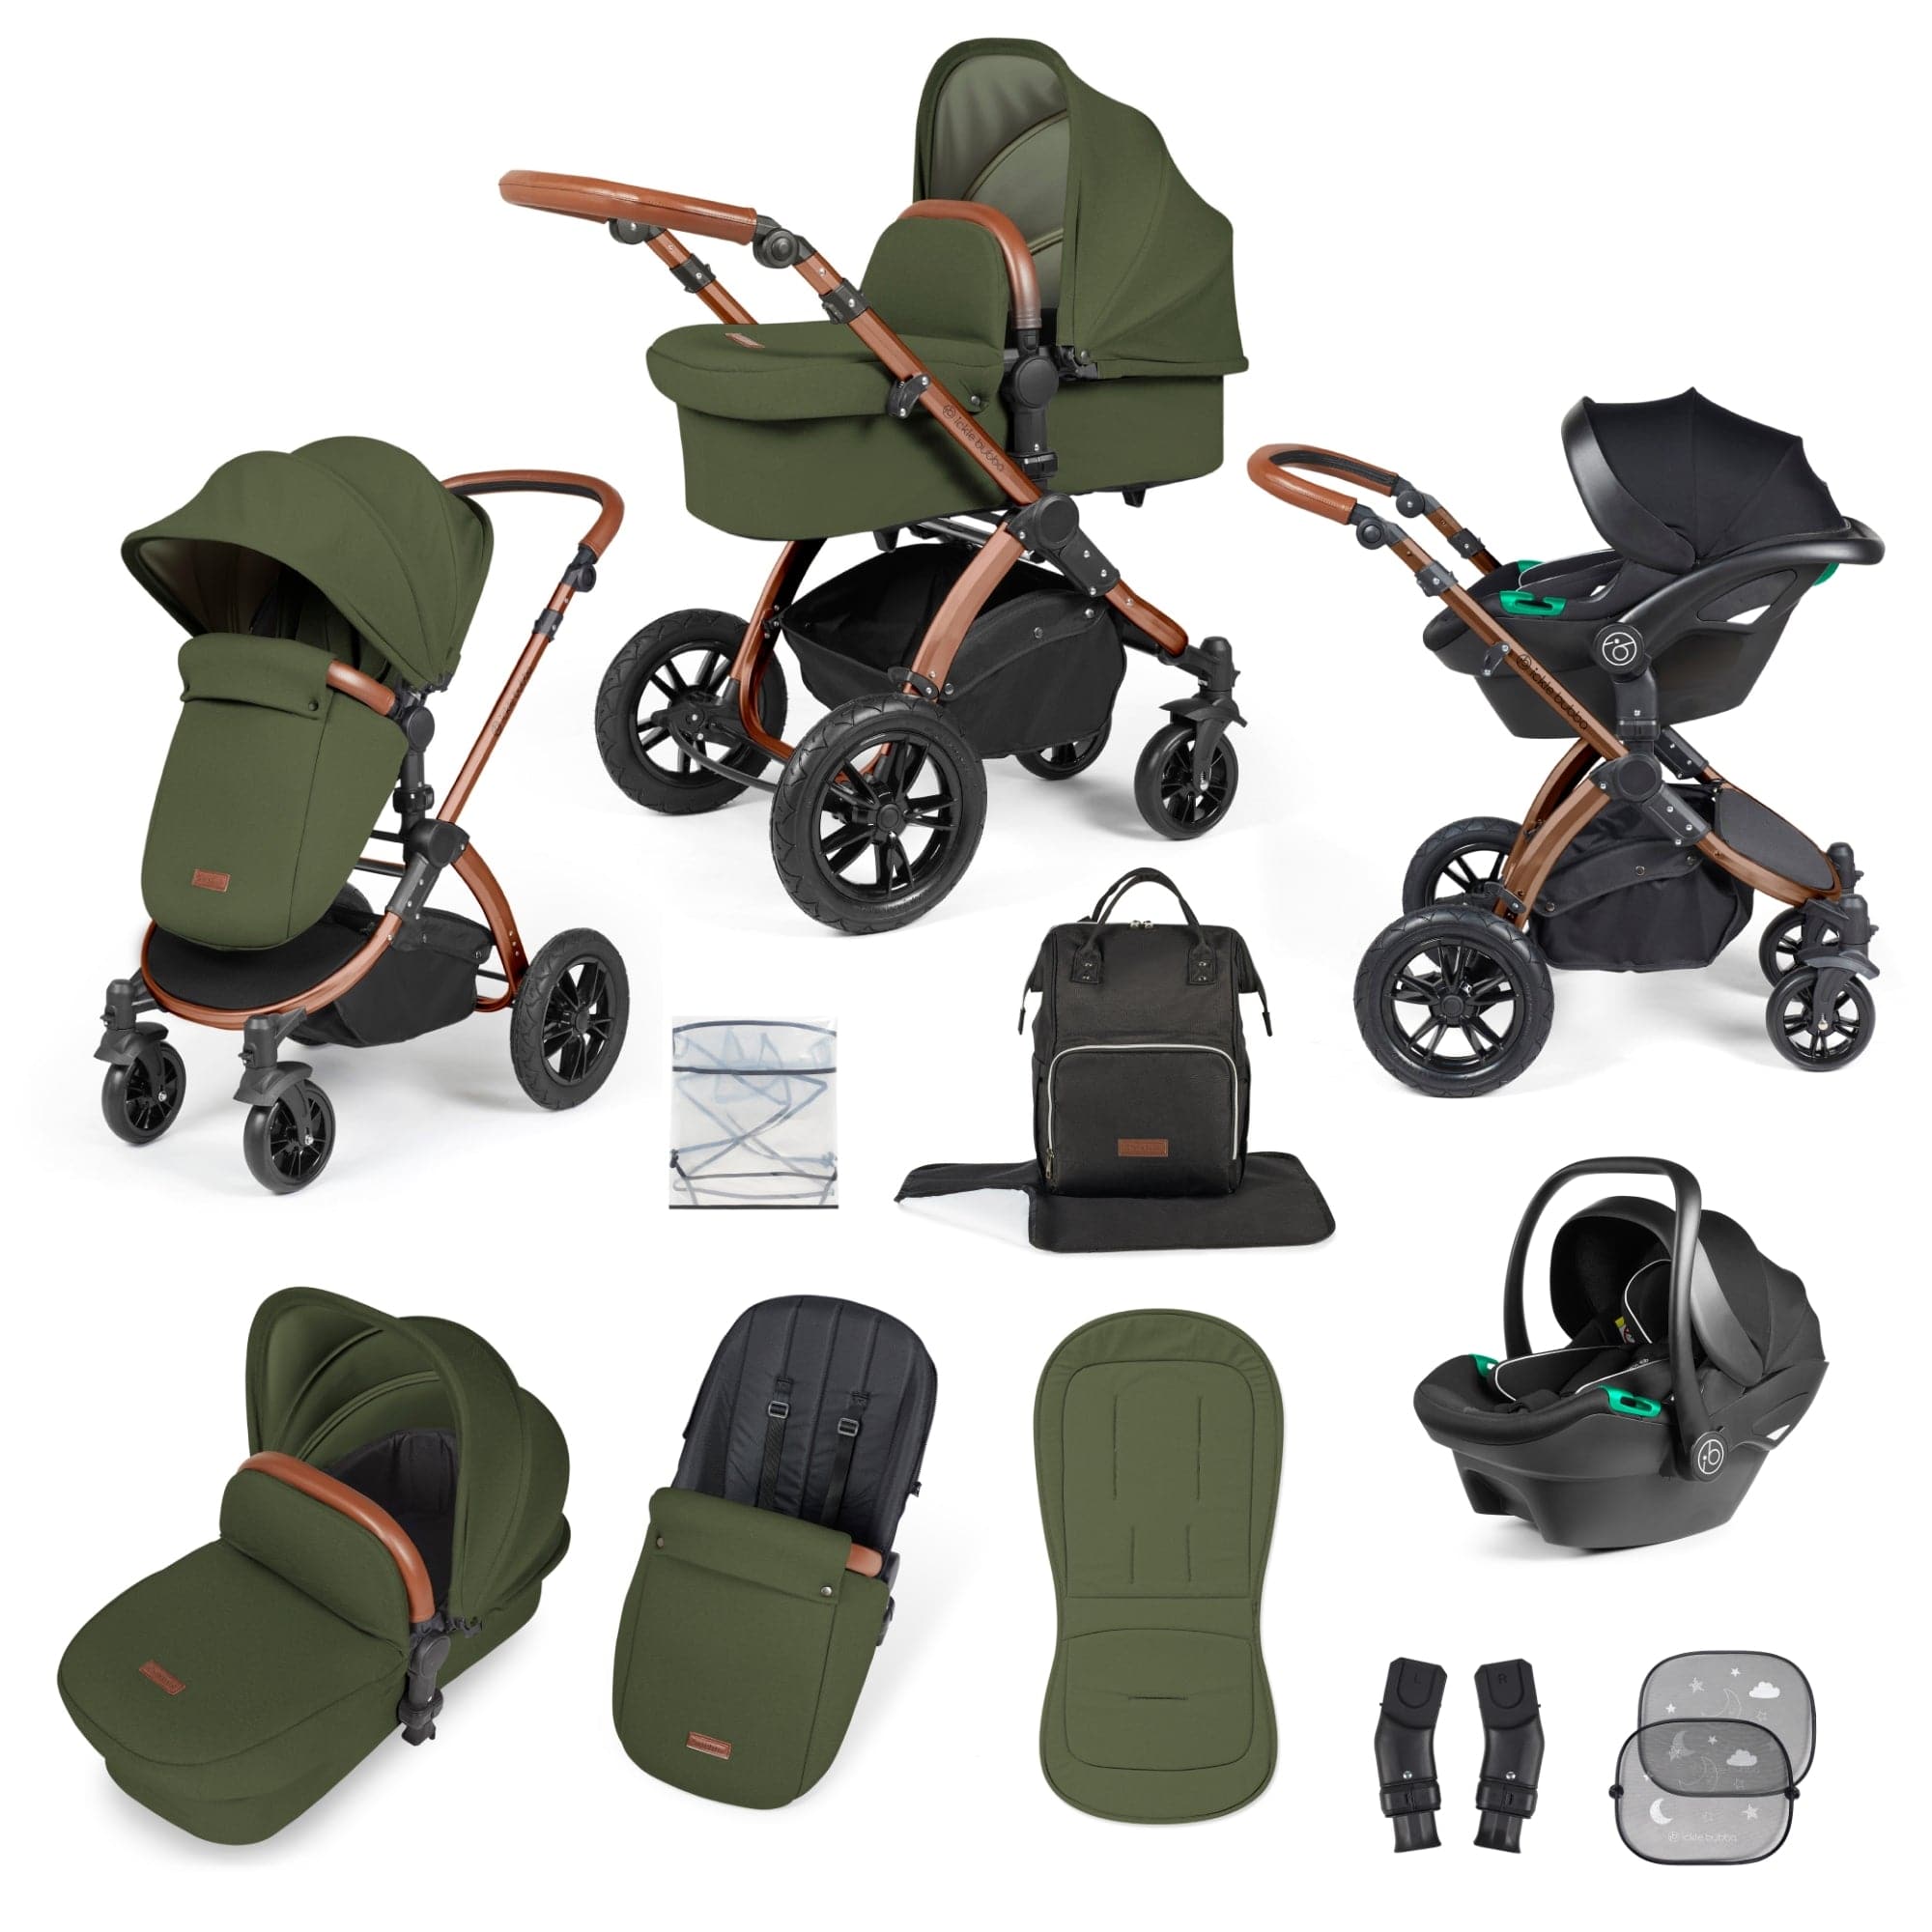 Ickle Bubba Stomp Luxe All-In-One I-Size Travel System With Isofix Base - Bronze / Woodland / Tan - For Your Little One